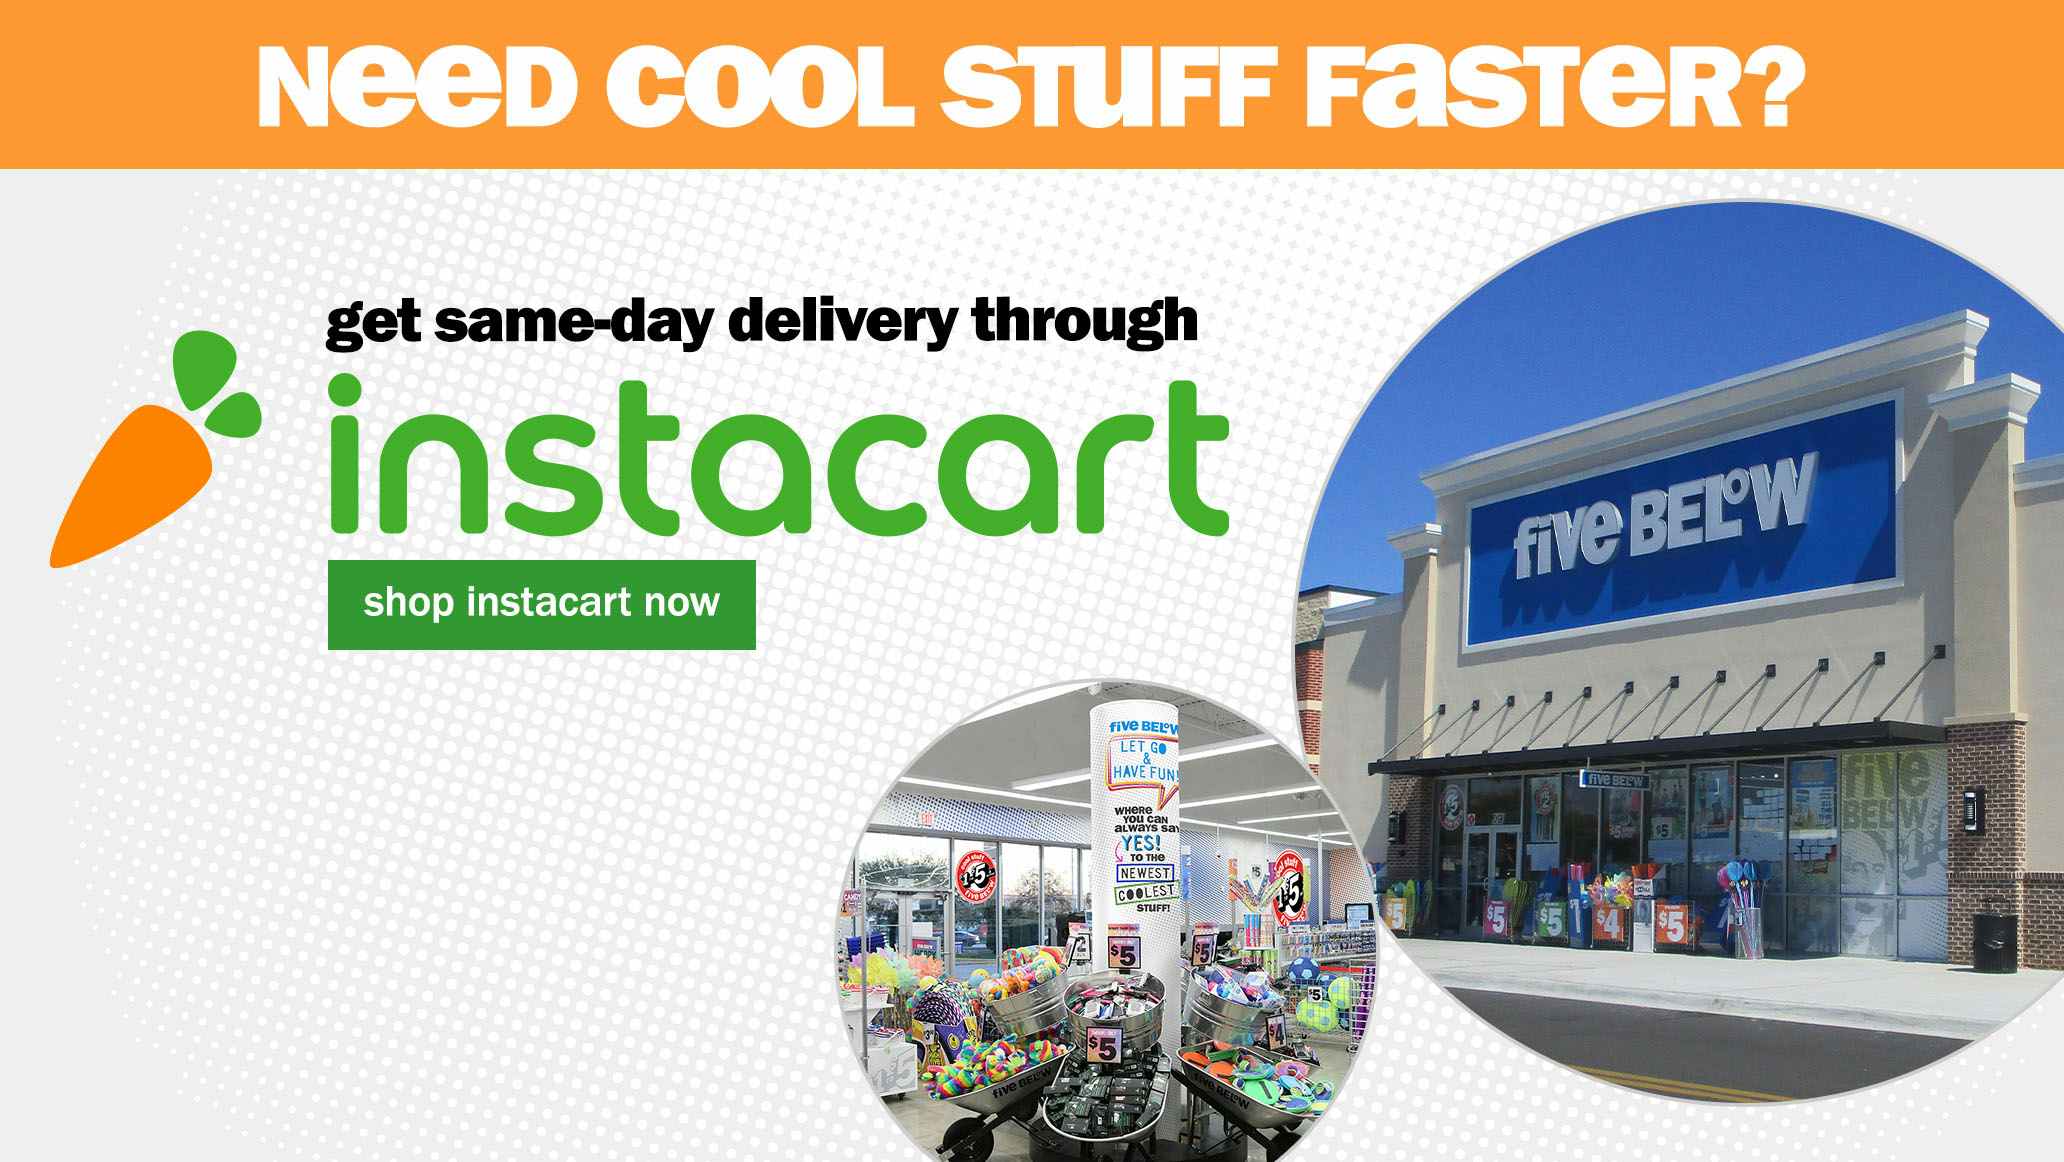 save on shipping cost by ordering items through instacart.